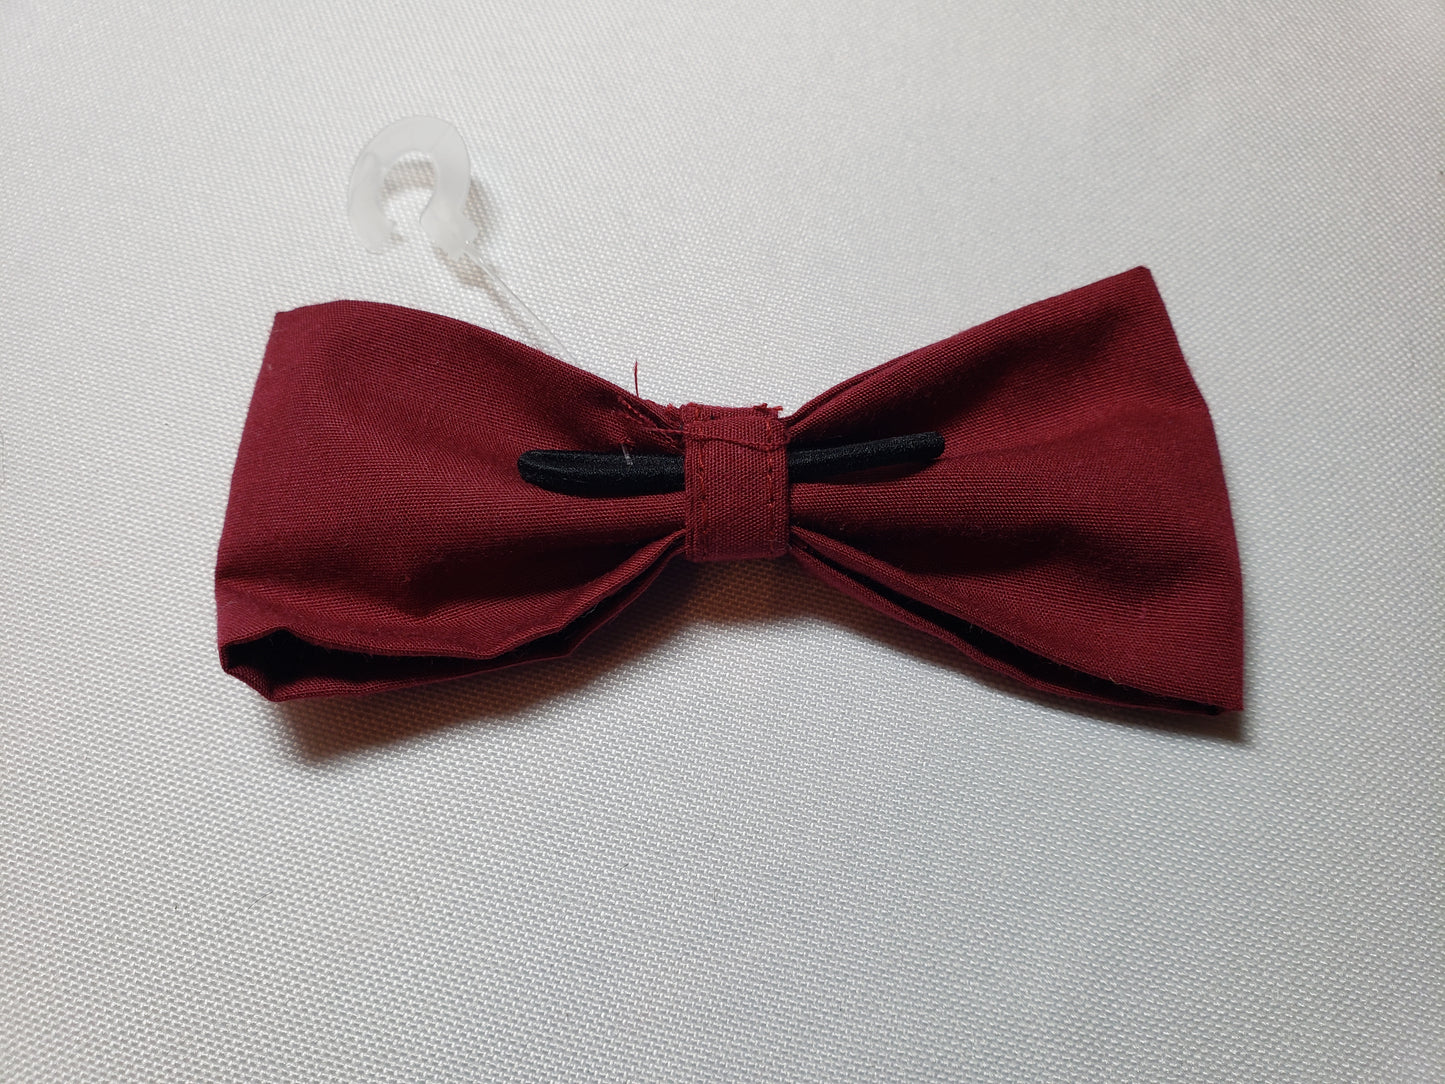 Maroon Over-the-Collar Pet Bow / Bowtie (Old Style)